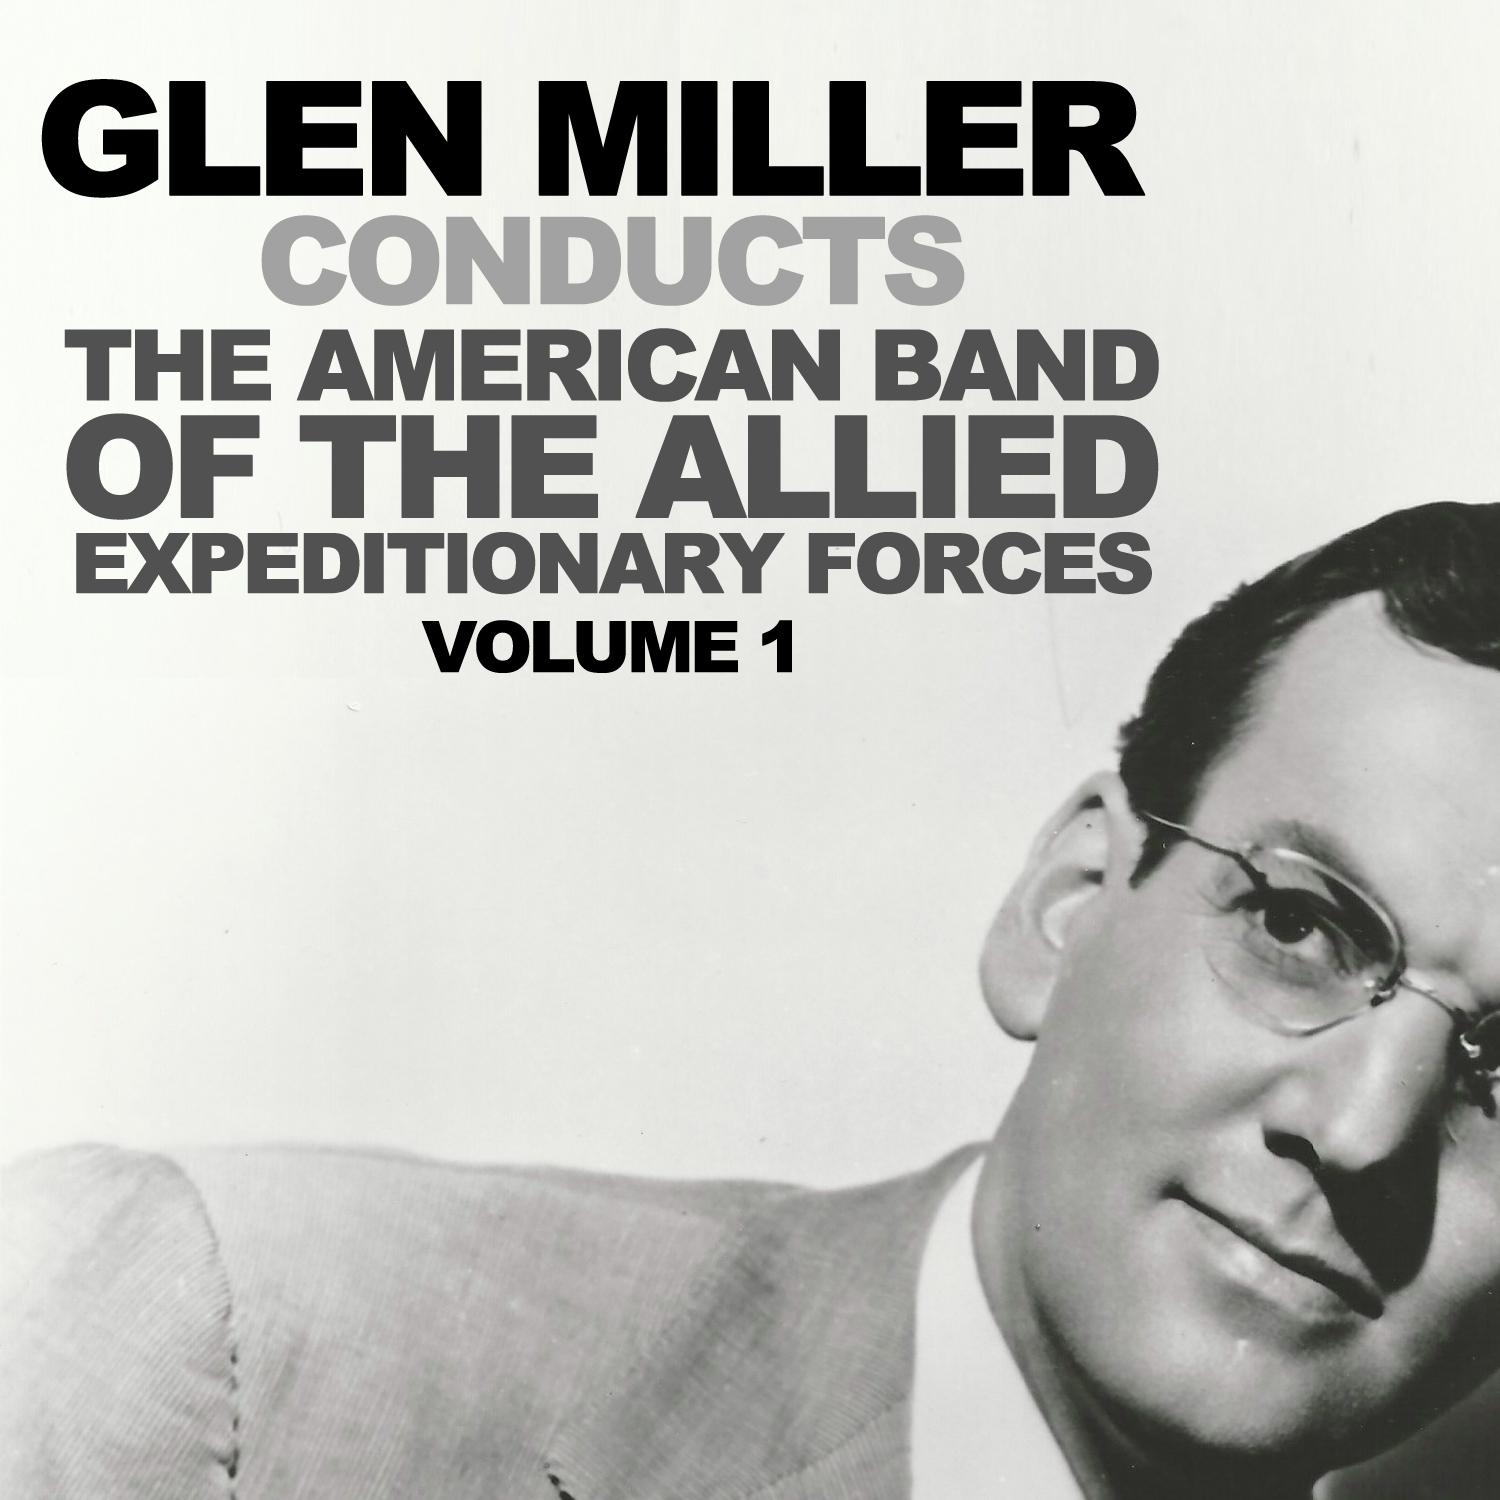 Glenn Miller Conducts the American Band of the Allied Expeditionary Forces Vol. 1